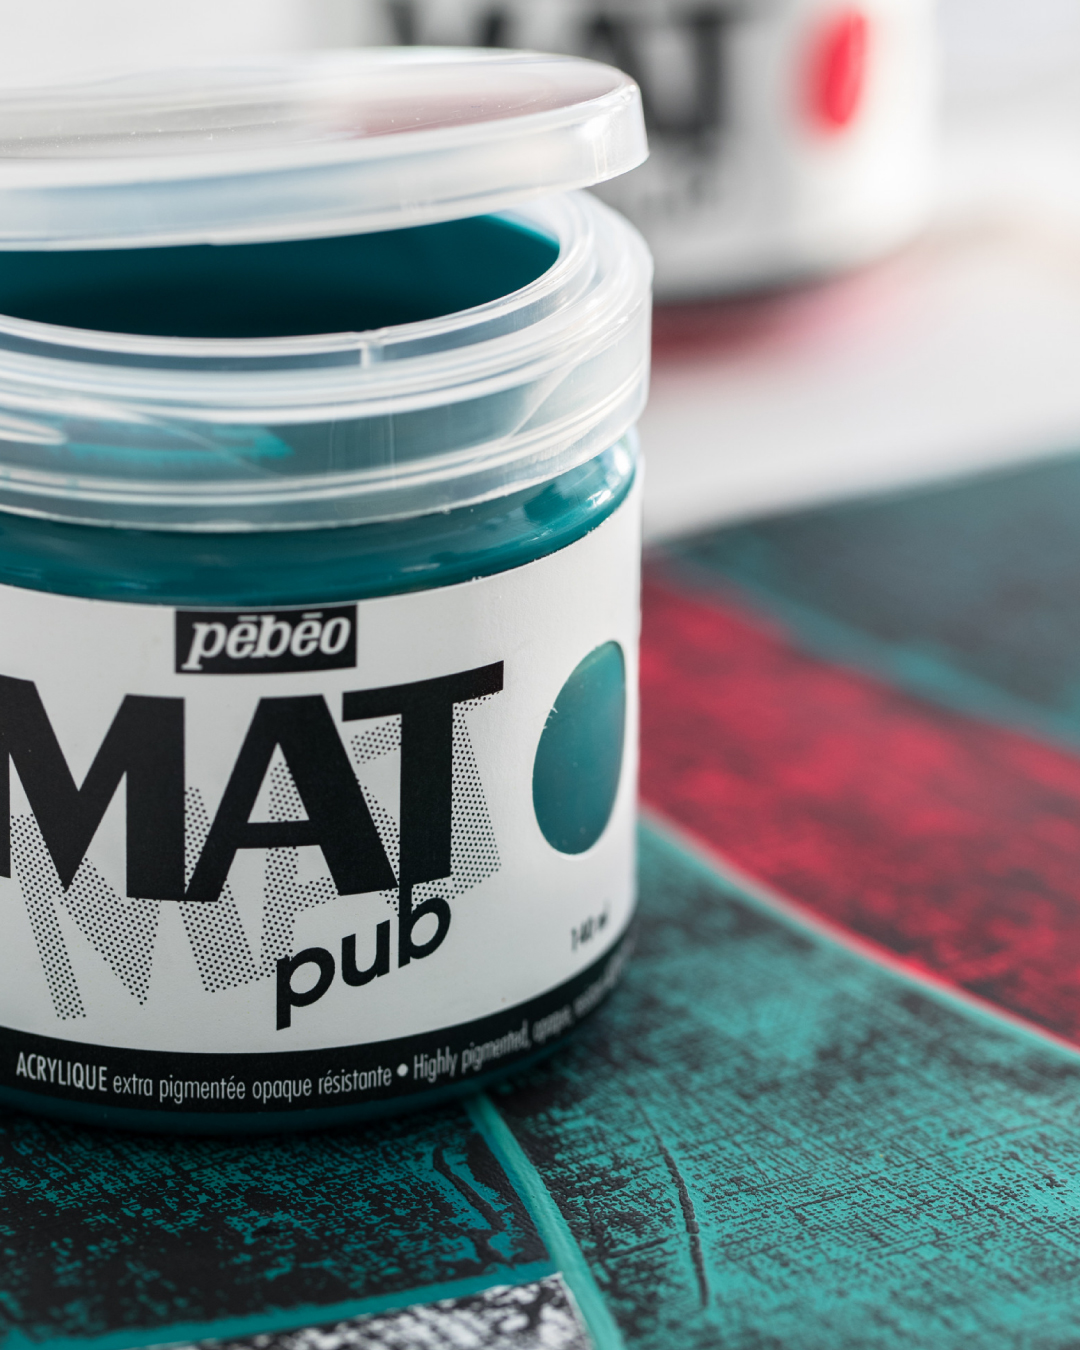 Our Mat Pub acrylic paint is ready-to-use, water-based, highly pigmented, and cadmium-free. 🎨🖌
It provides exce...